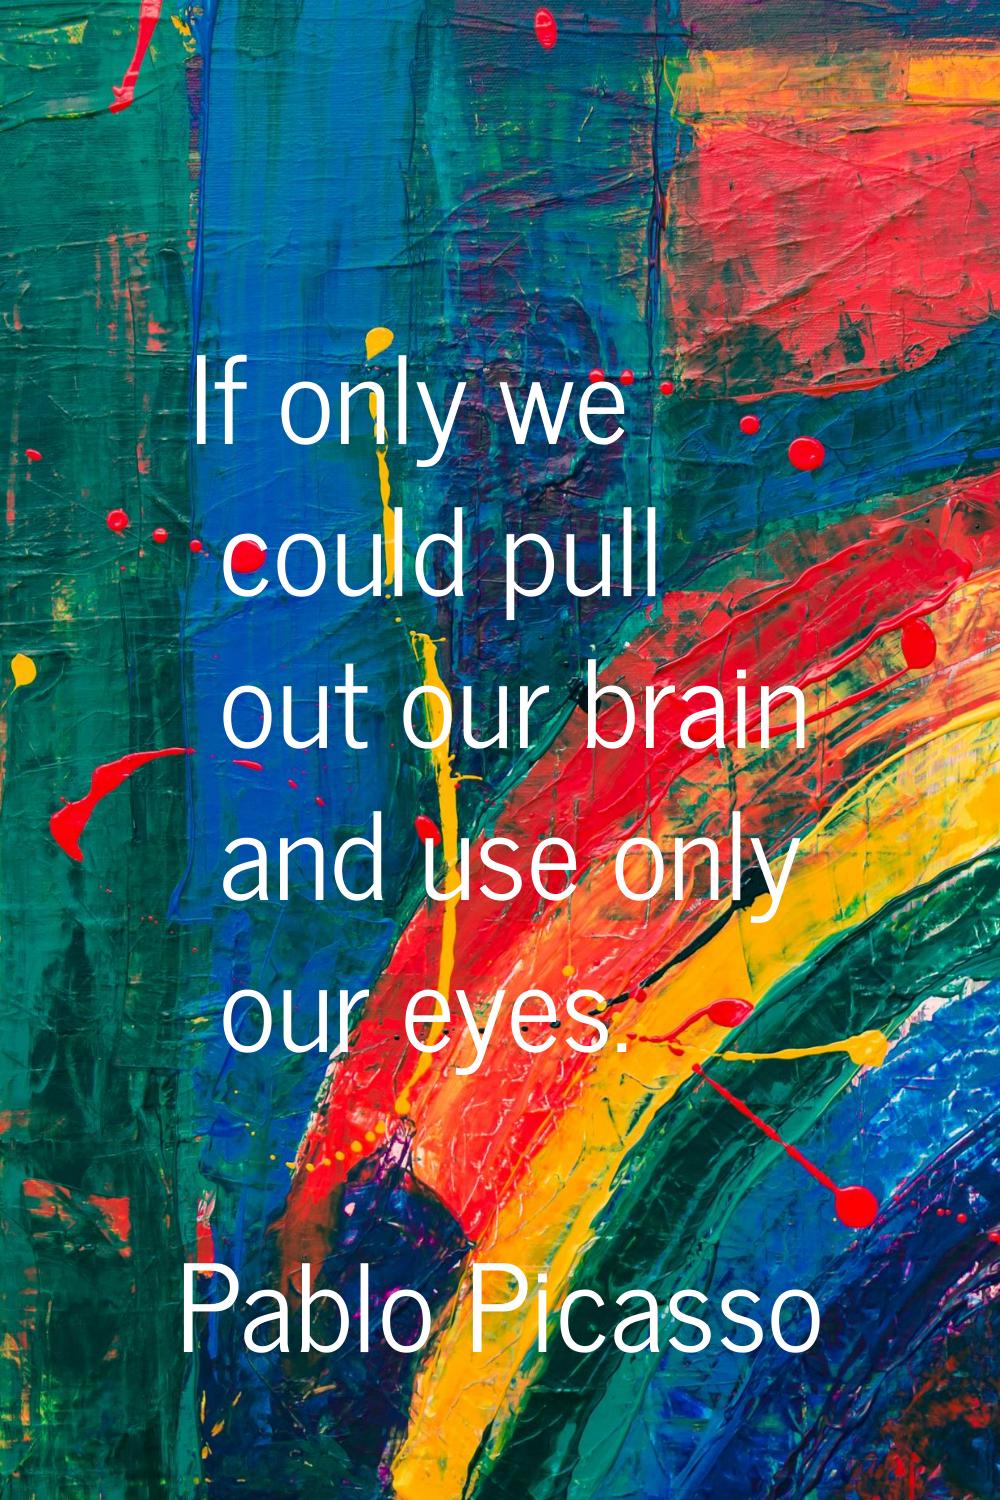 If only we could pull out our brain and use only our eyes.